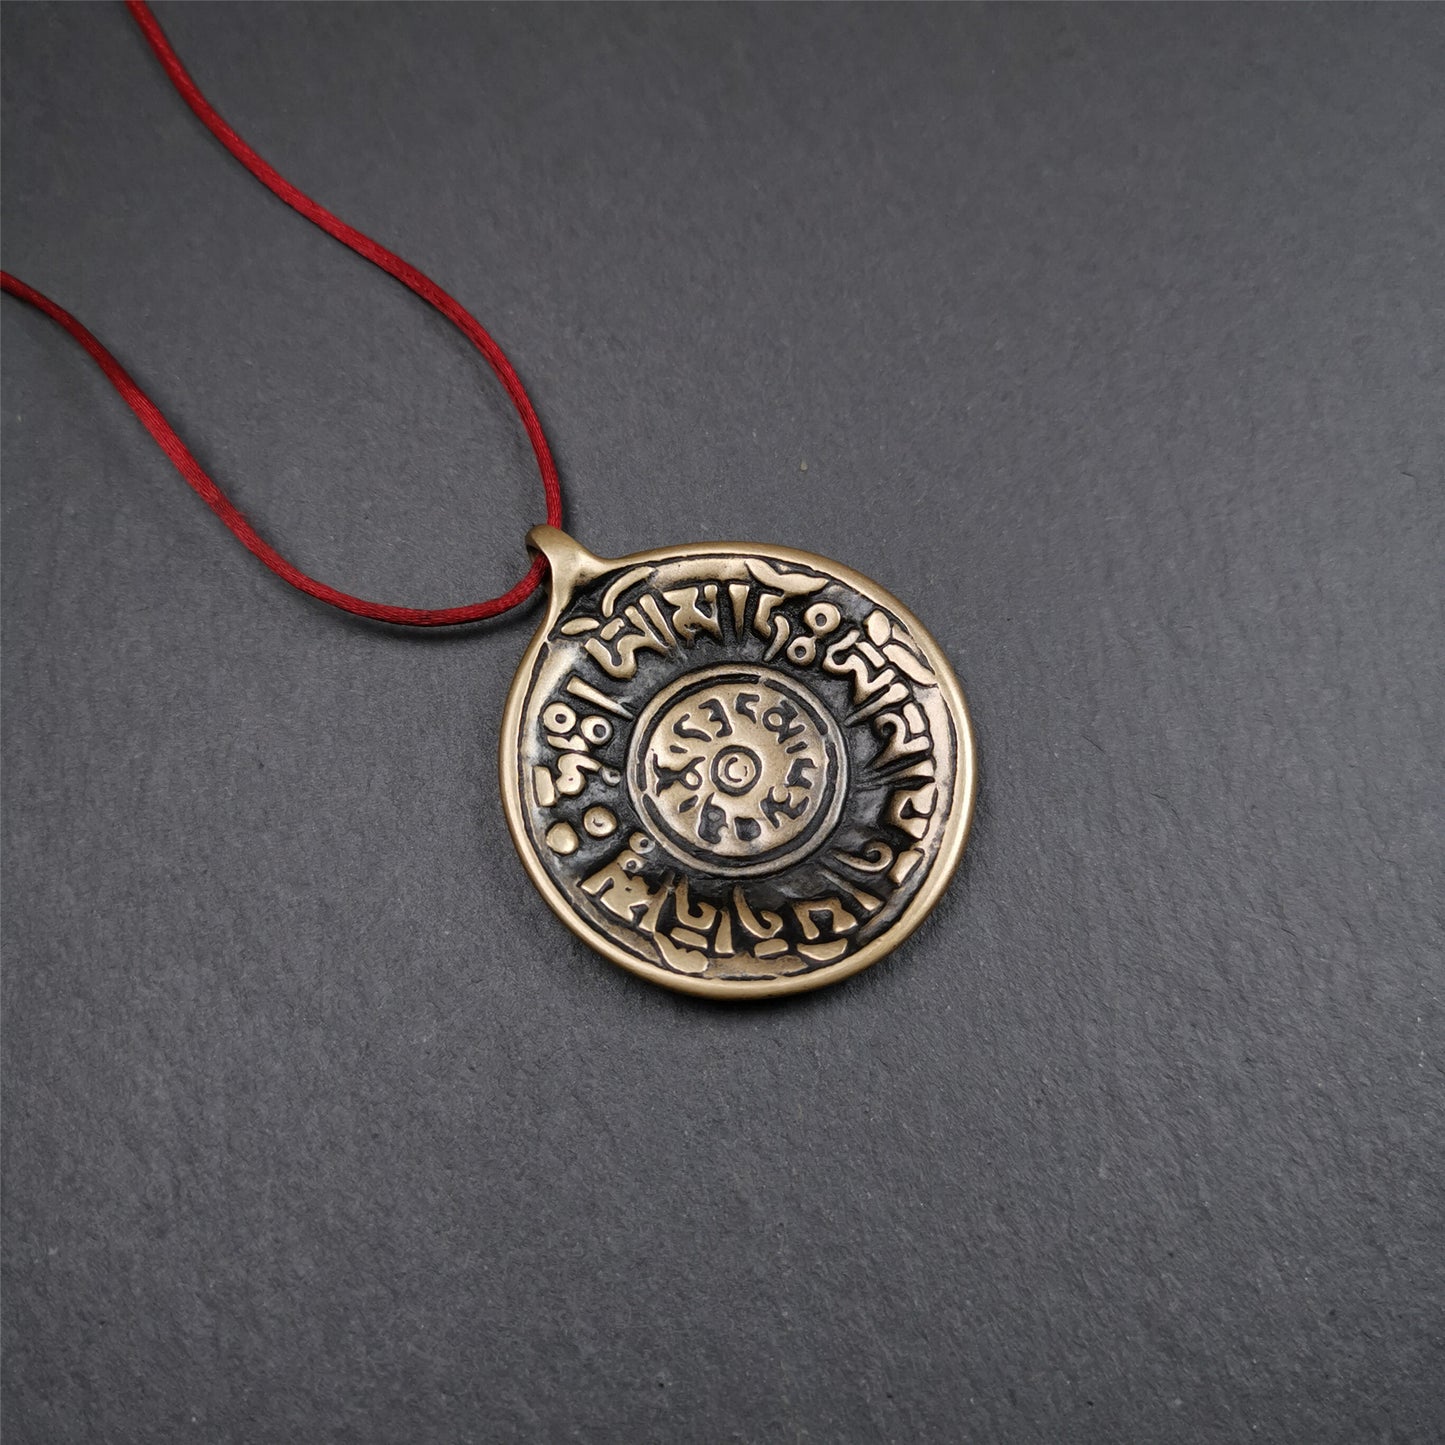 This Om badge amulet was collected from Yushu City Tibet,about 50 years old. It is round shape,made of lima brass, 1.58 inches,carved with mantra of chenrezig OM MANI PADME HUM. You can make it into a necklace, or a keychain, pendant